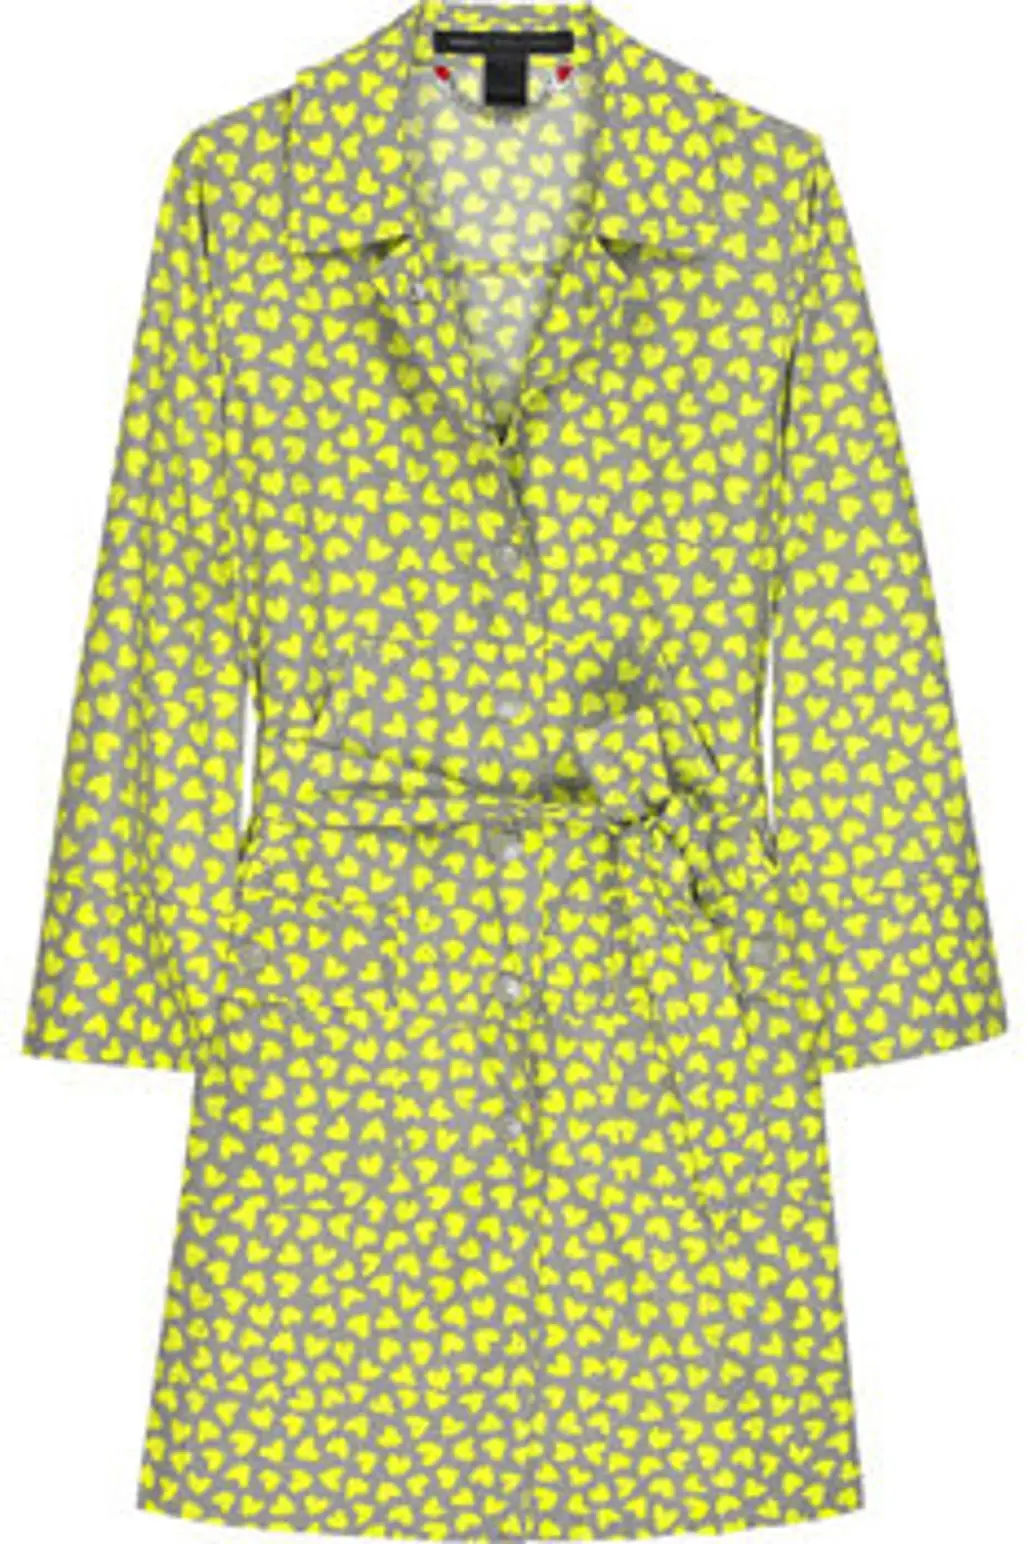 Marc by Marc Jacobs “Wild at Heart” Rain Coat